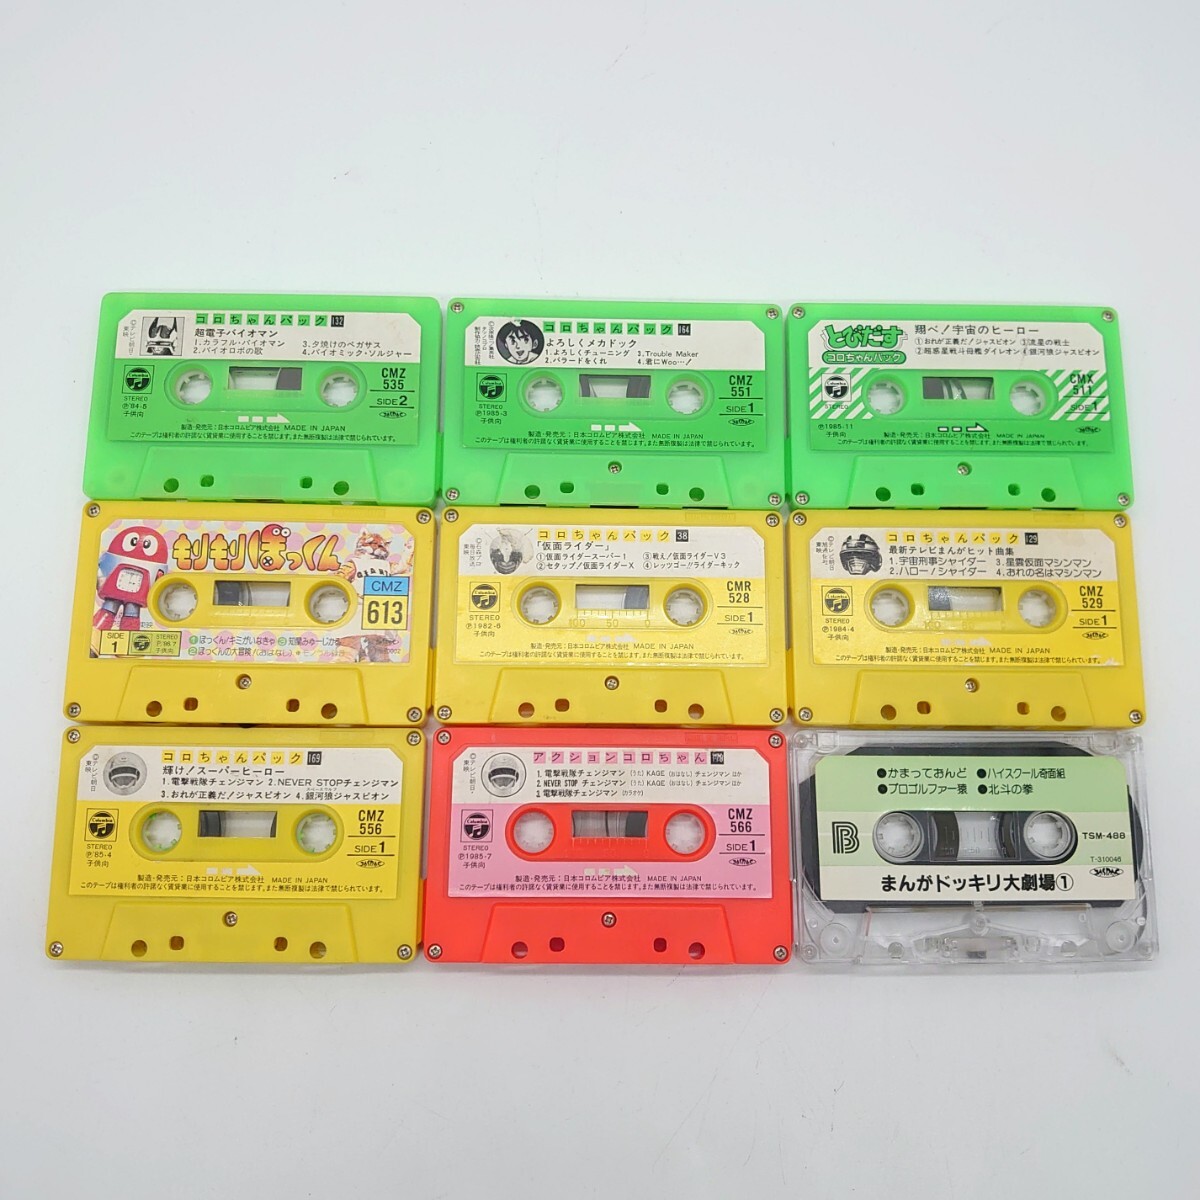 koro Chan pack ko rom Via anime special effects stereo cassette tape Thema bending theme music Showa Retro that time thing period thing set Junk tp-24x400